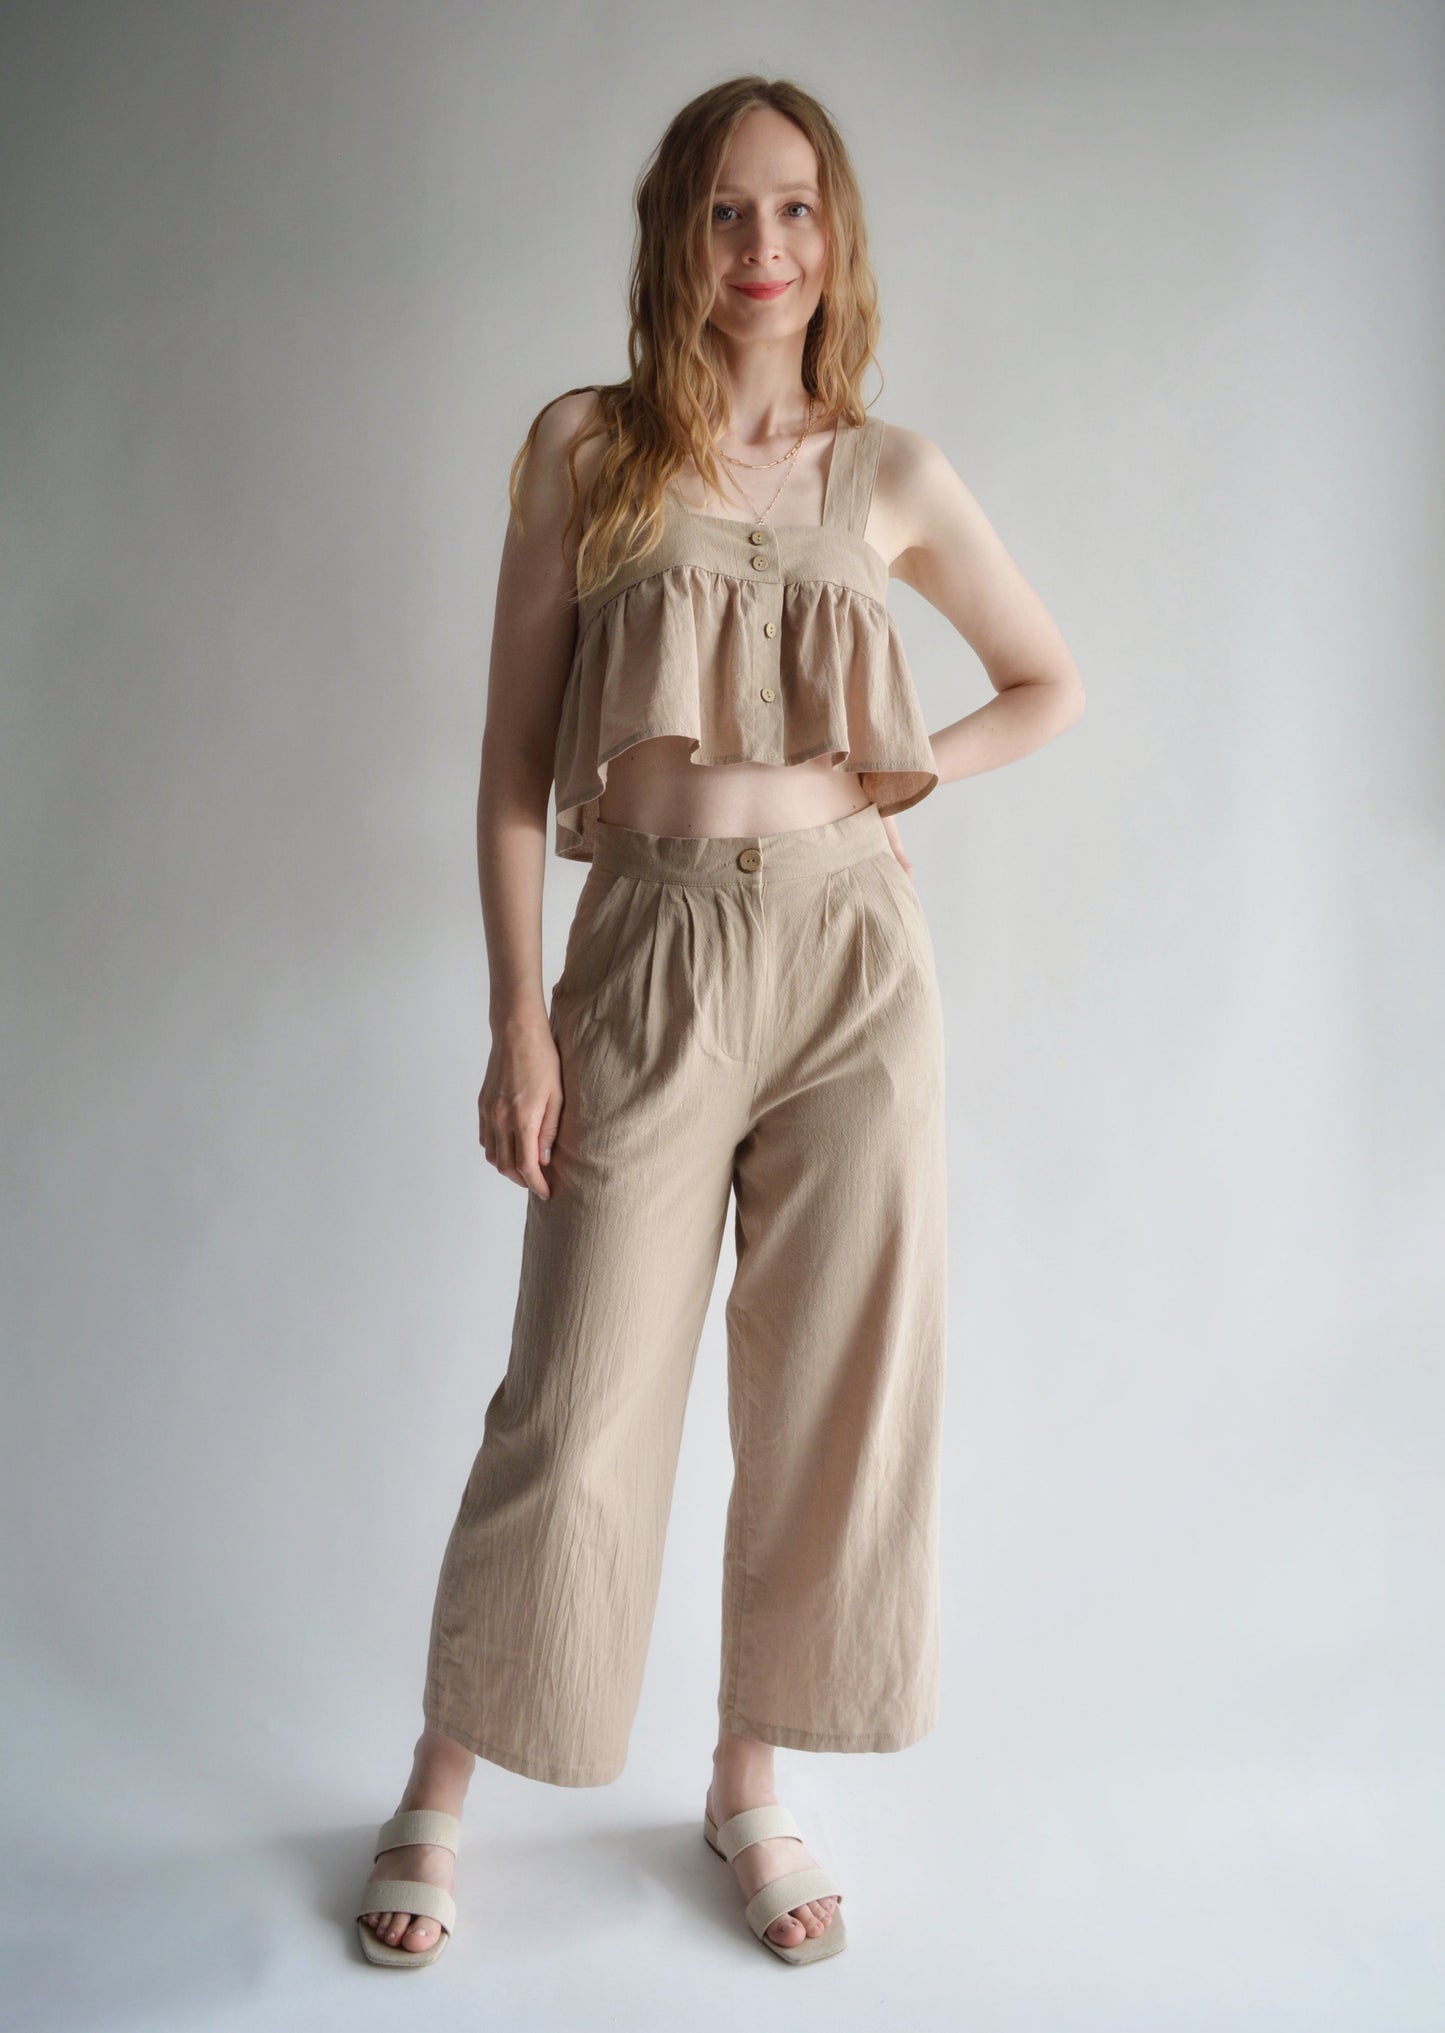 Two-Piece Set: Tank and Pants in Iced Latte (beige)color